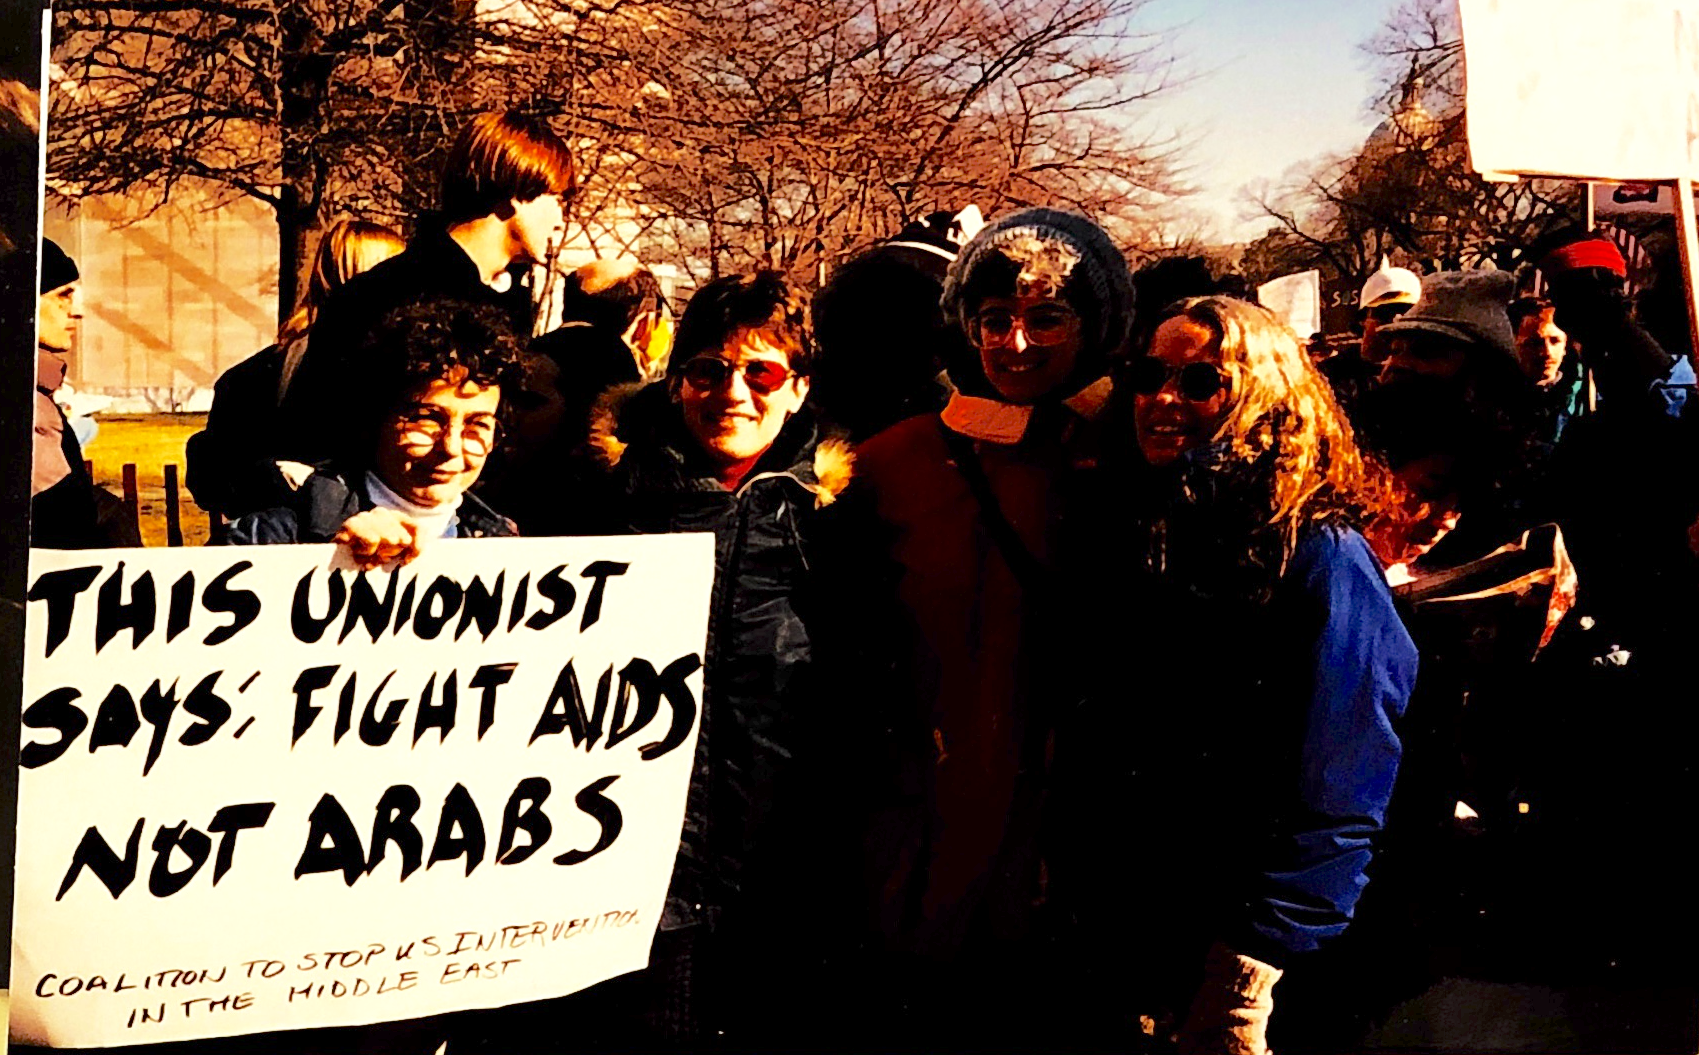 Kipp Dawson stands with a group of women at a gathering, holding a sign that says "This Unionist says: Fight AIDS, Not Arabs. Coalition to Stop US intervention in the Middle East"